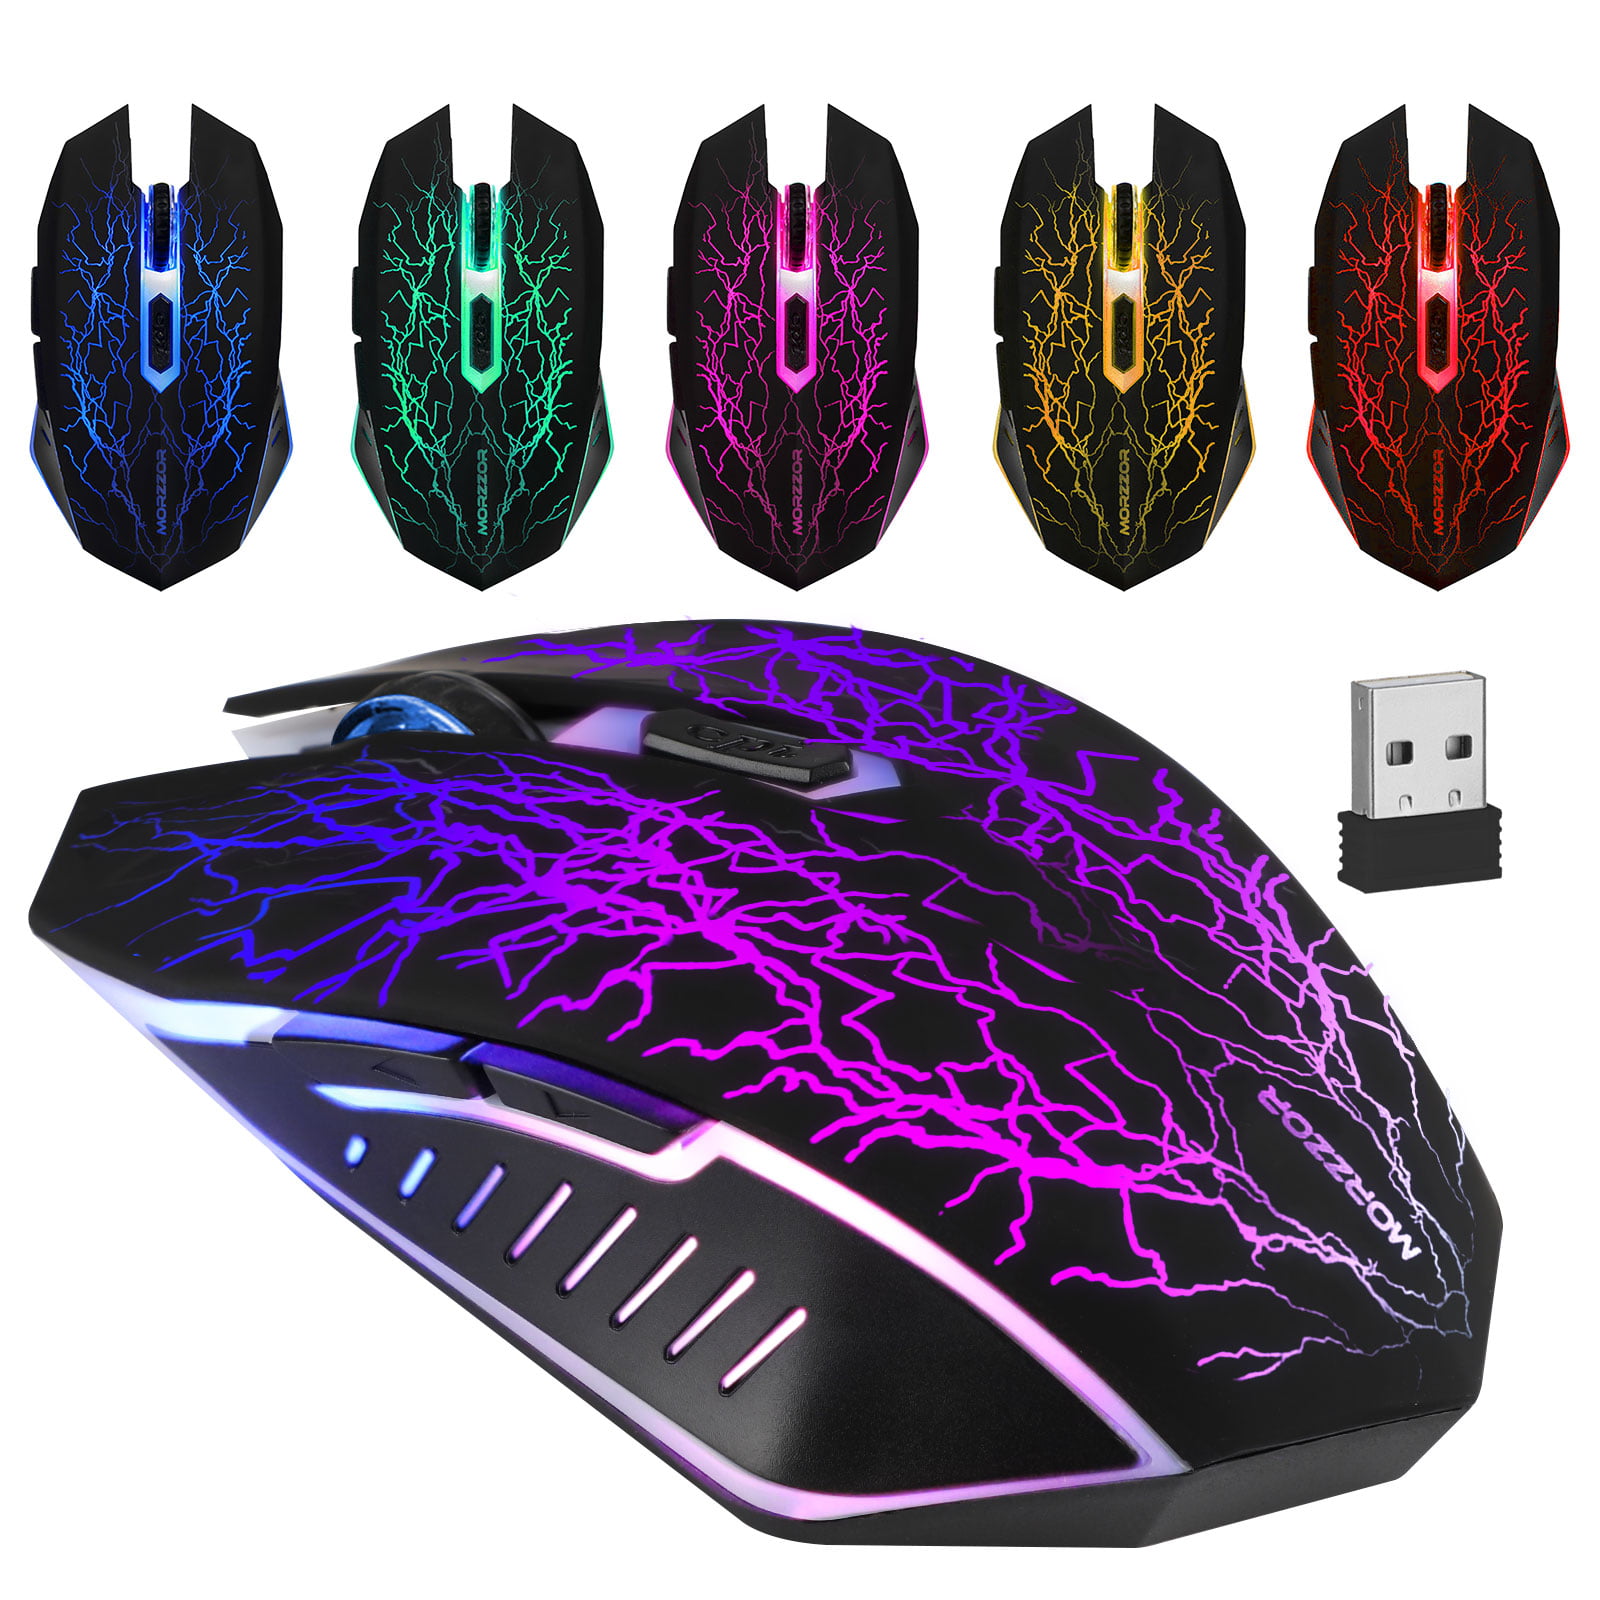 2.4G USB 2.0 Wireless Optical Mouse Mice 6 Key 1200 DPI Gaming For PC Laptops 